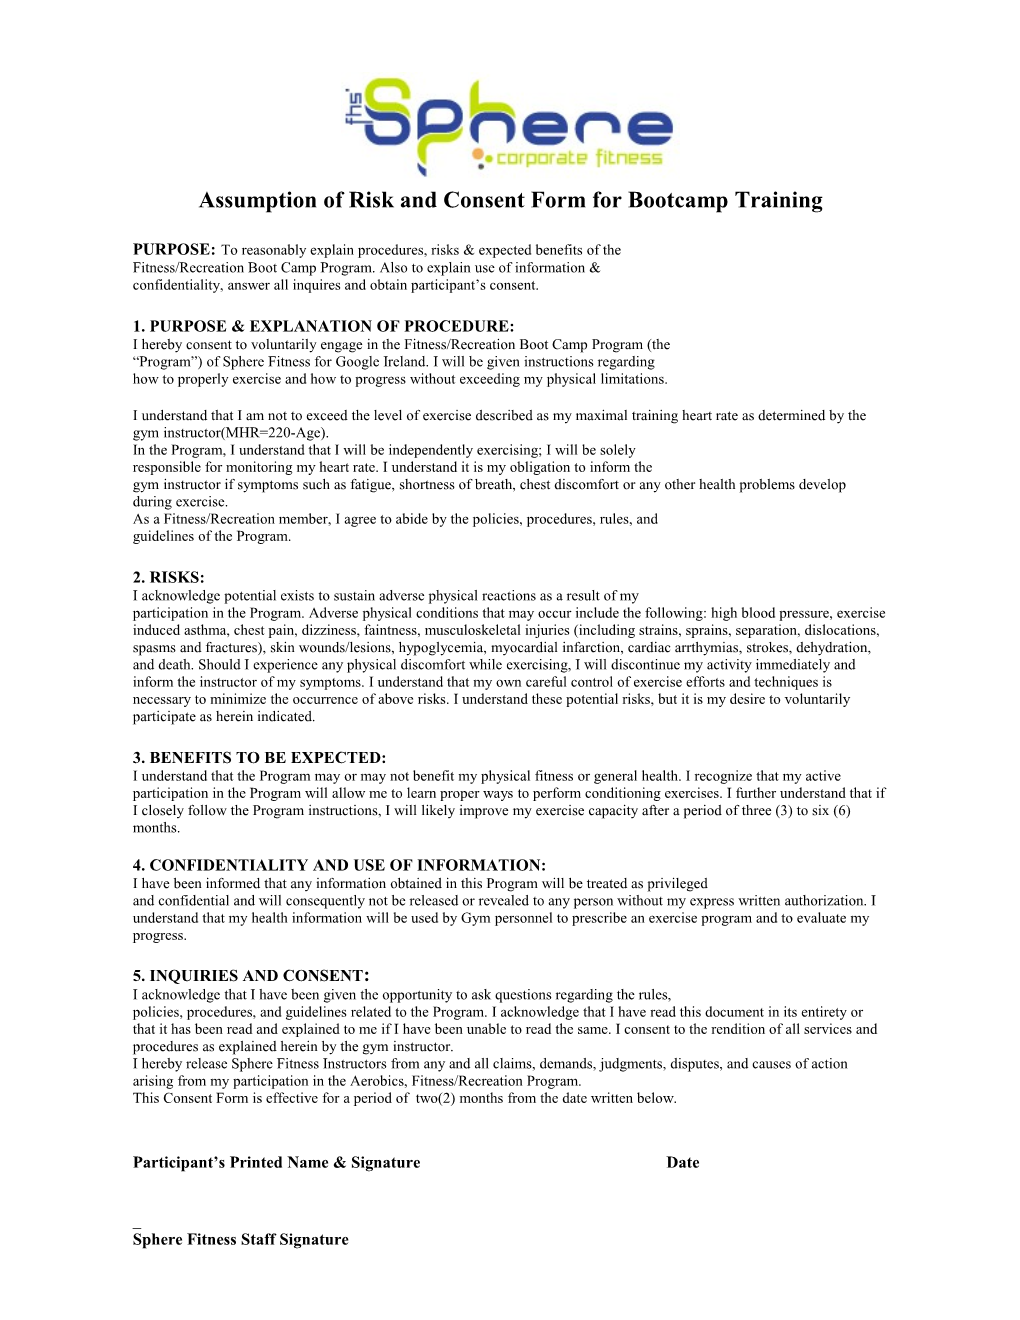 Assumption of Risk and Consent Form for Bootcamp Training